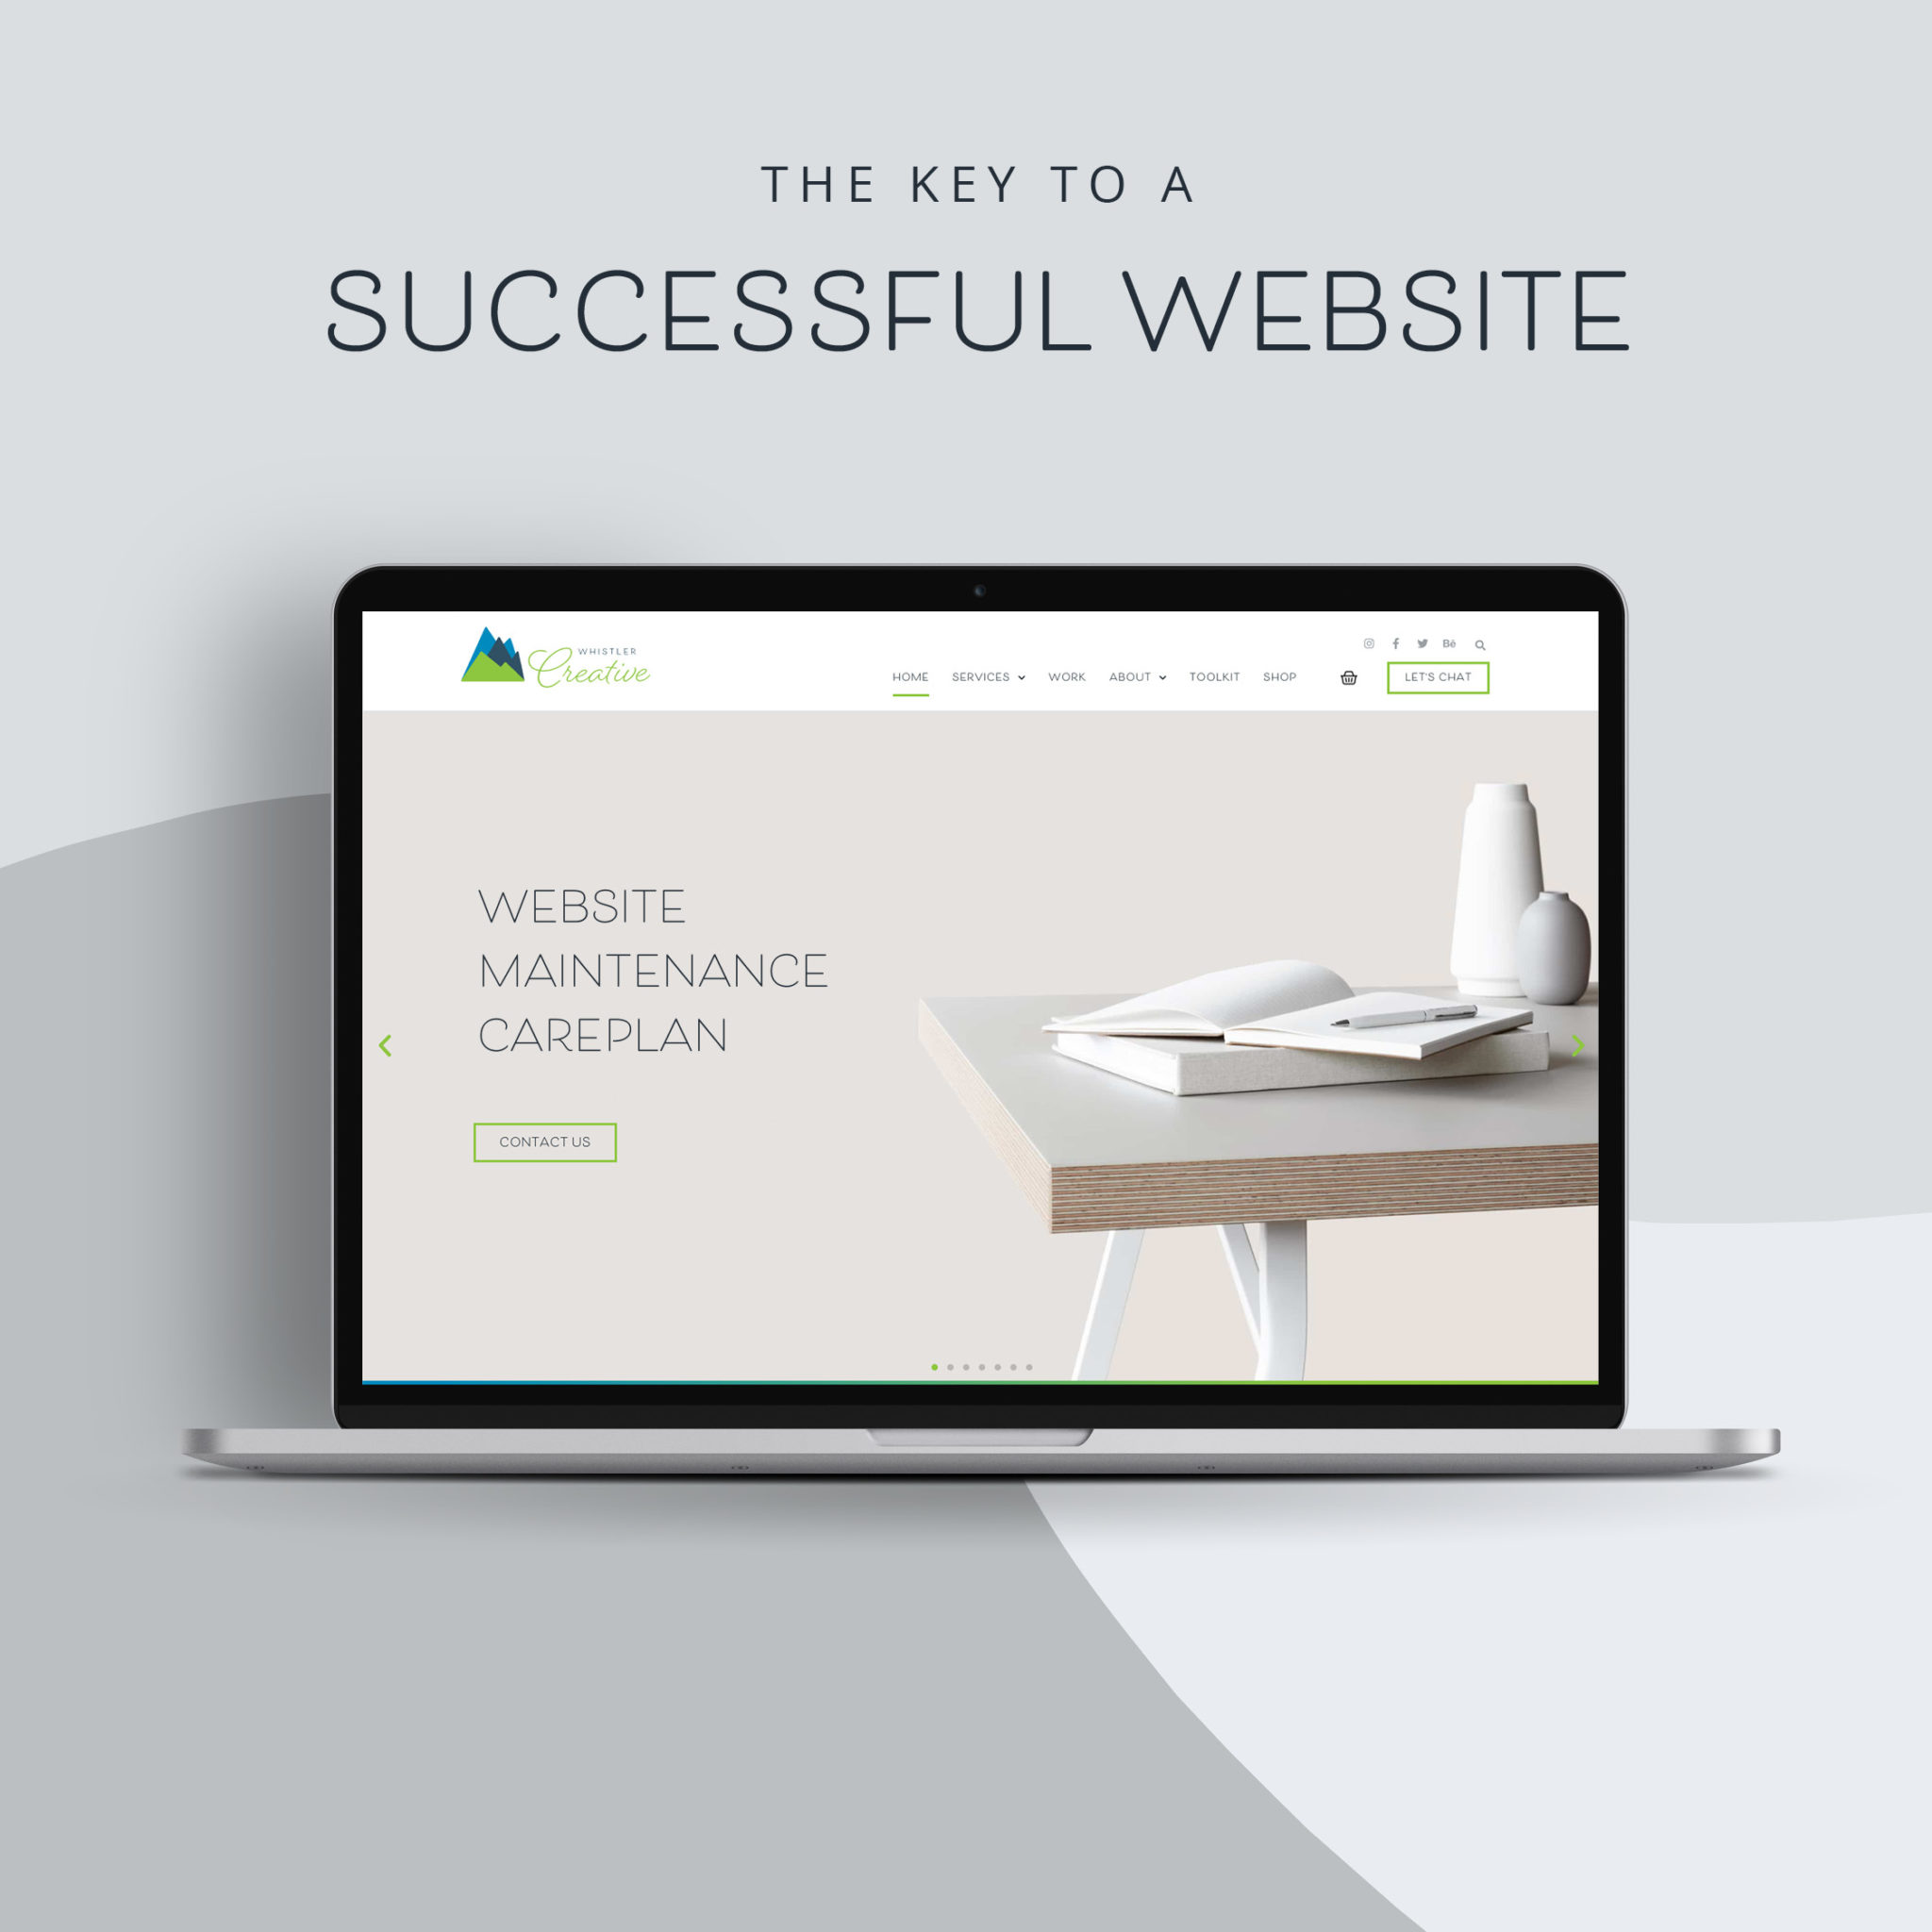 The key to a successful website - maintenance